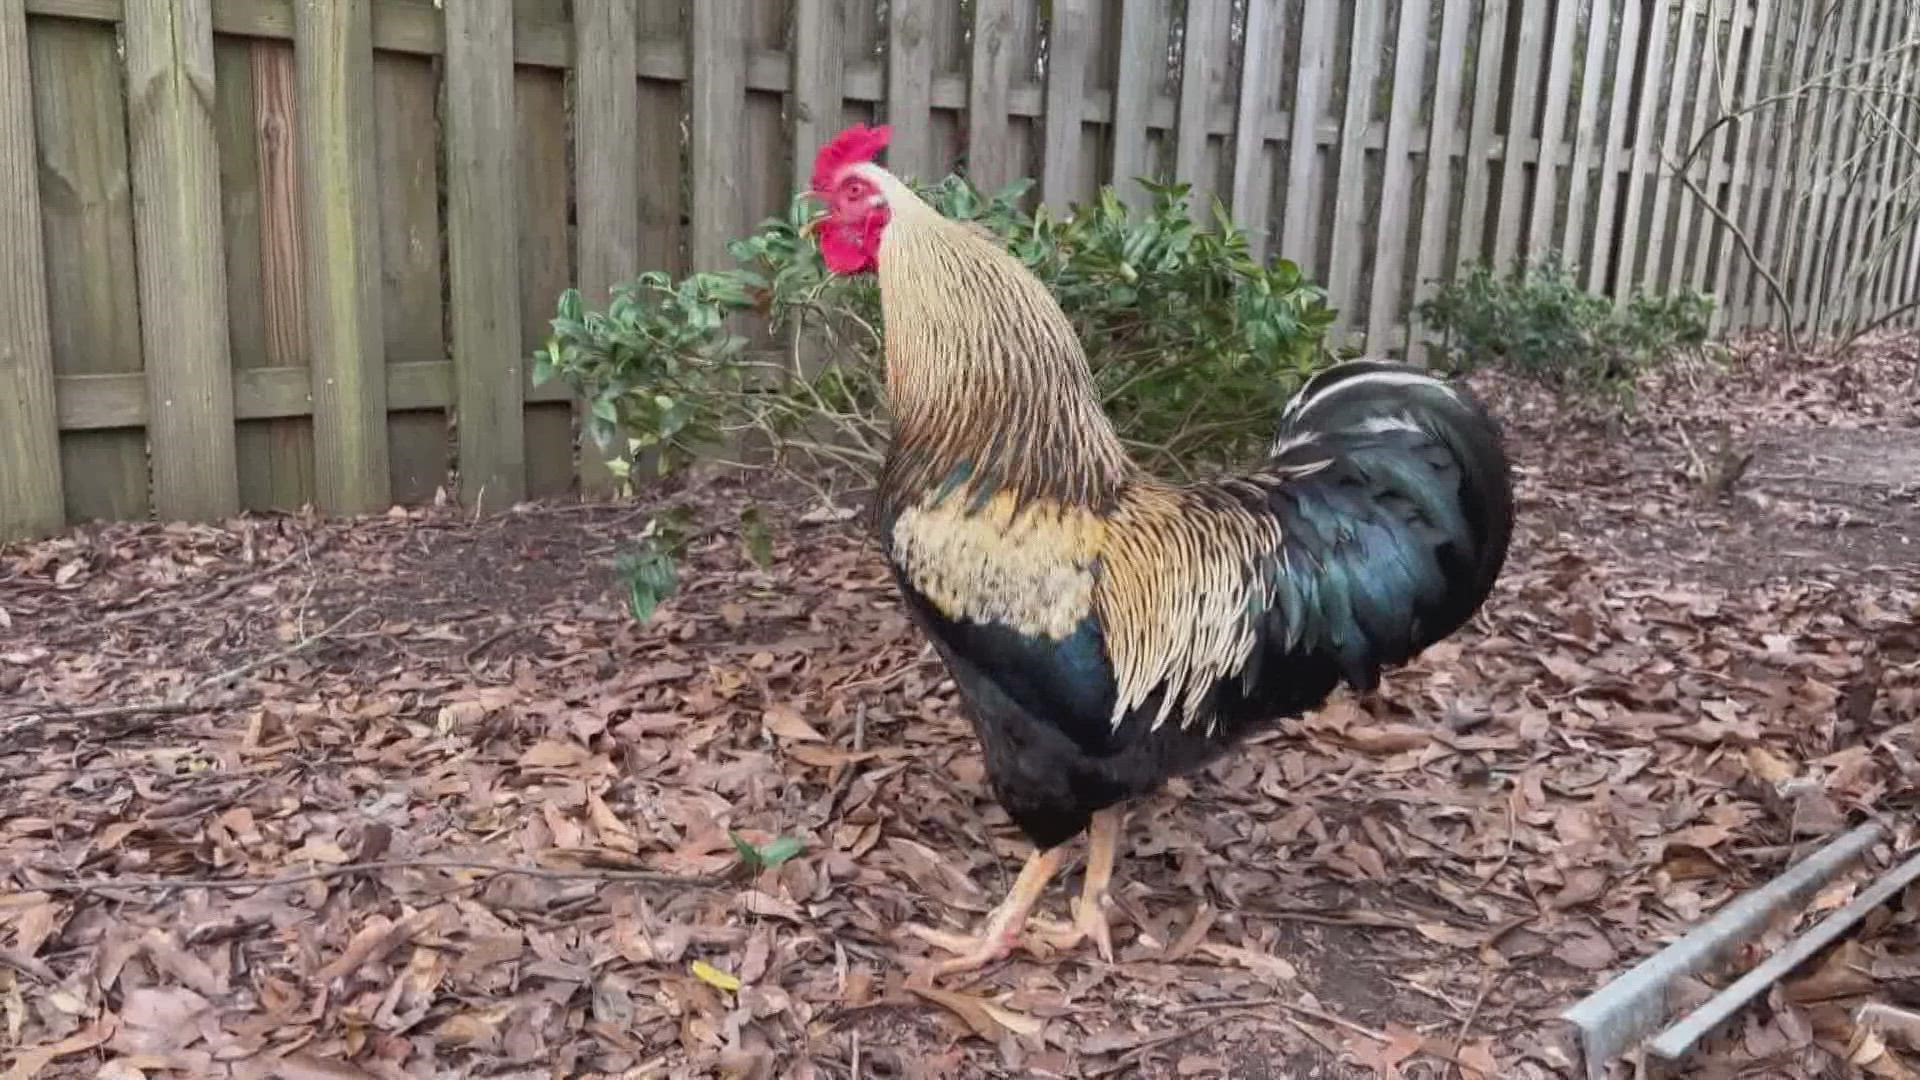 The Popeyes in Slidell has elected a new mascot, a live chicken named Rocco.